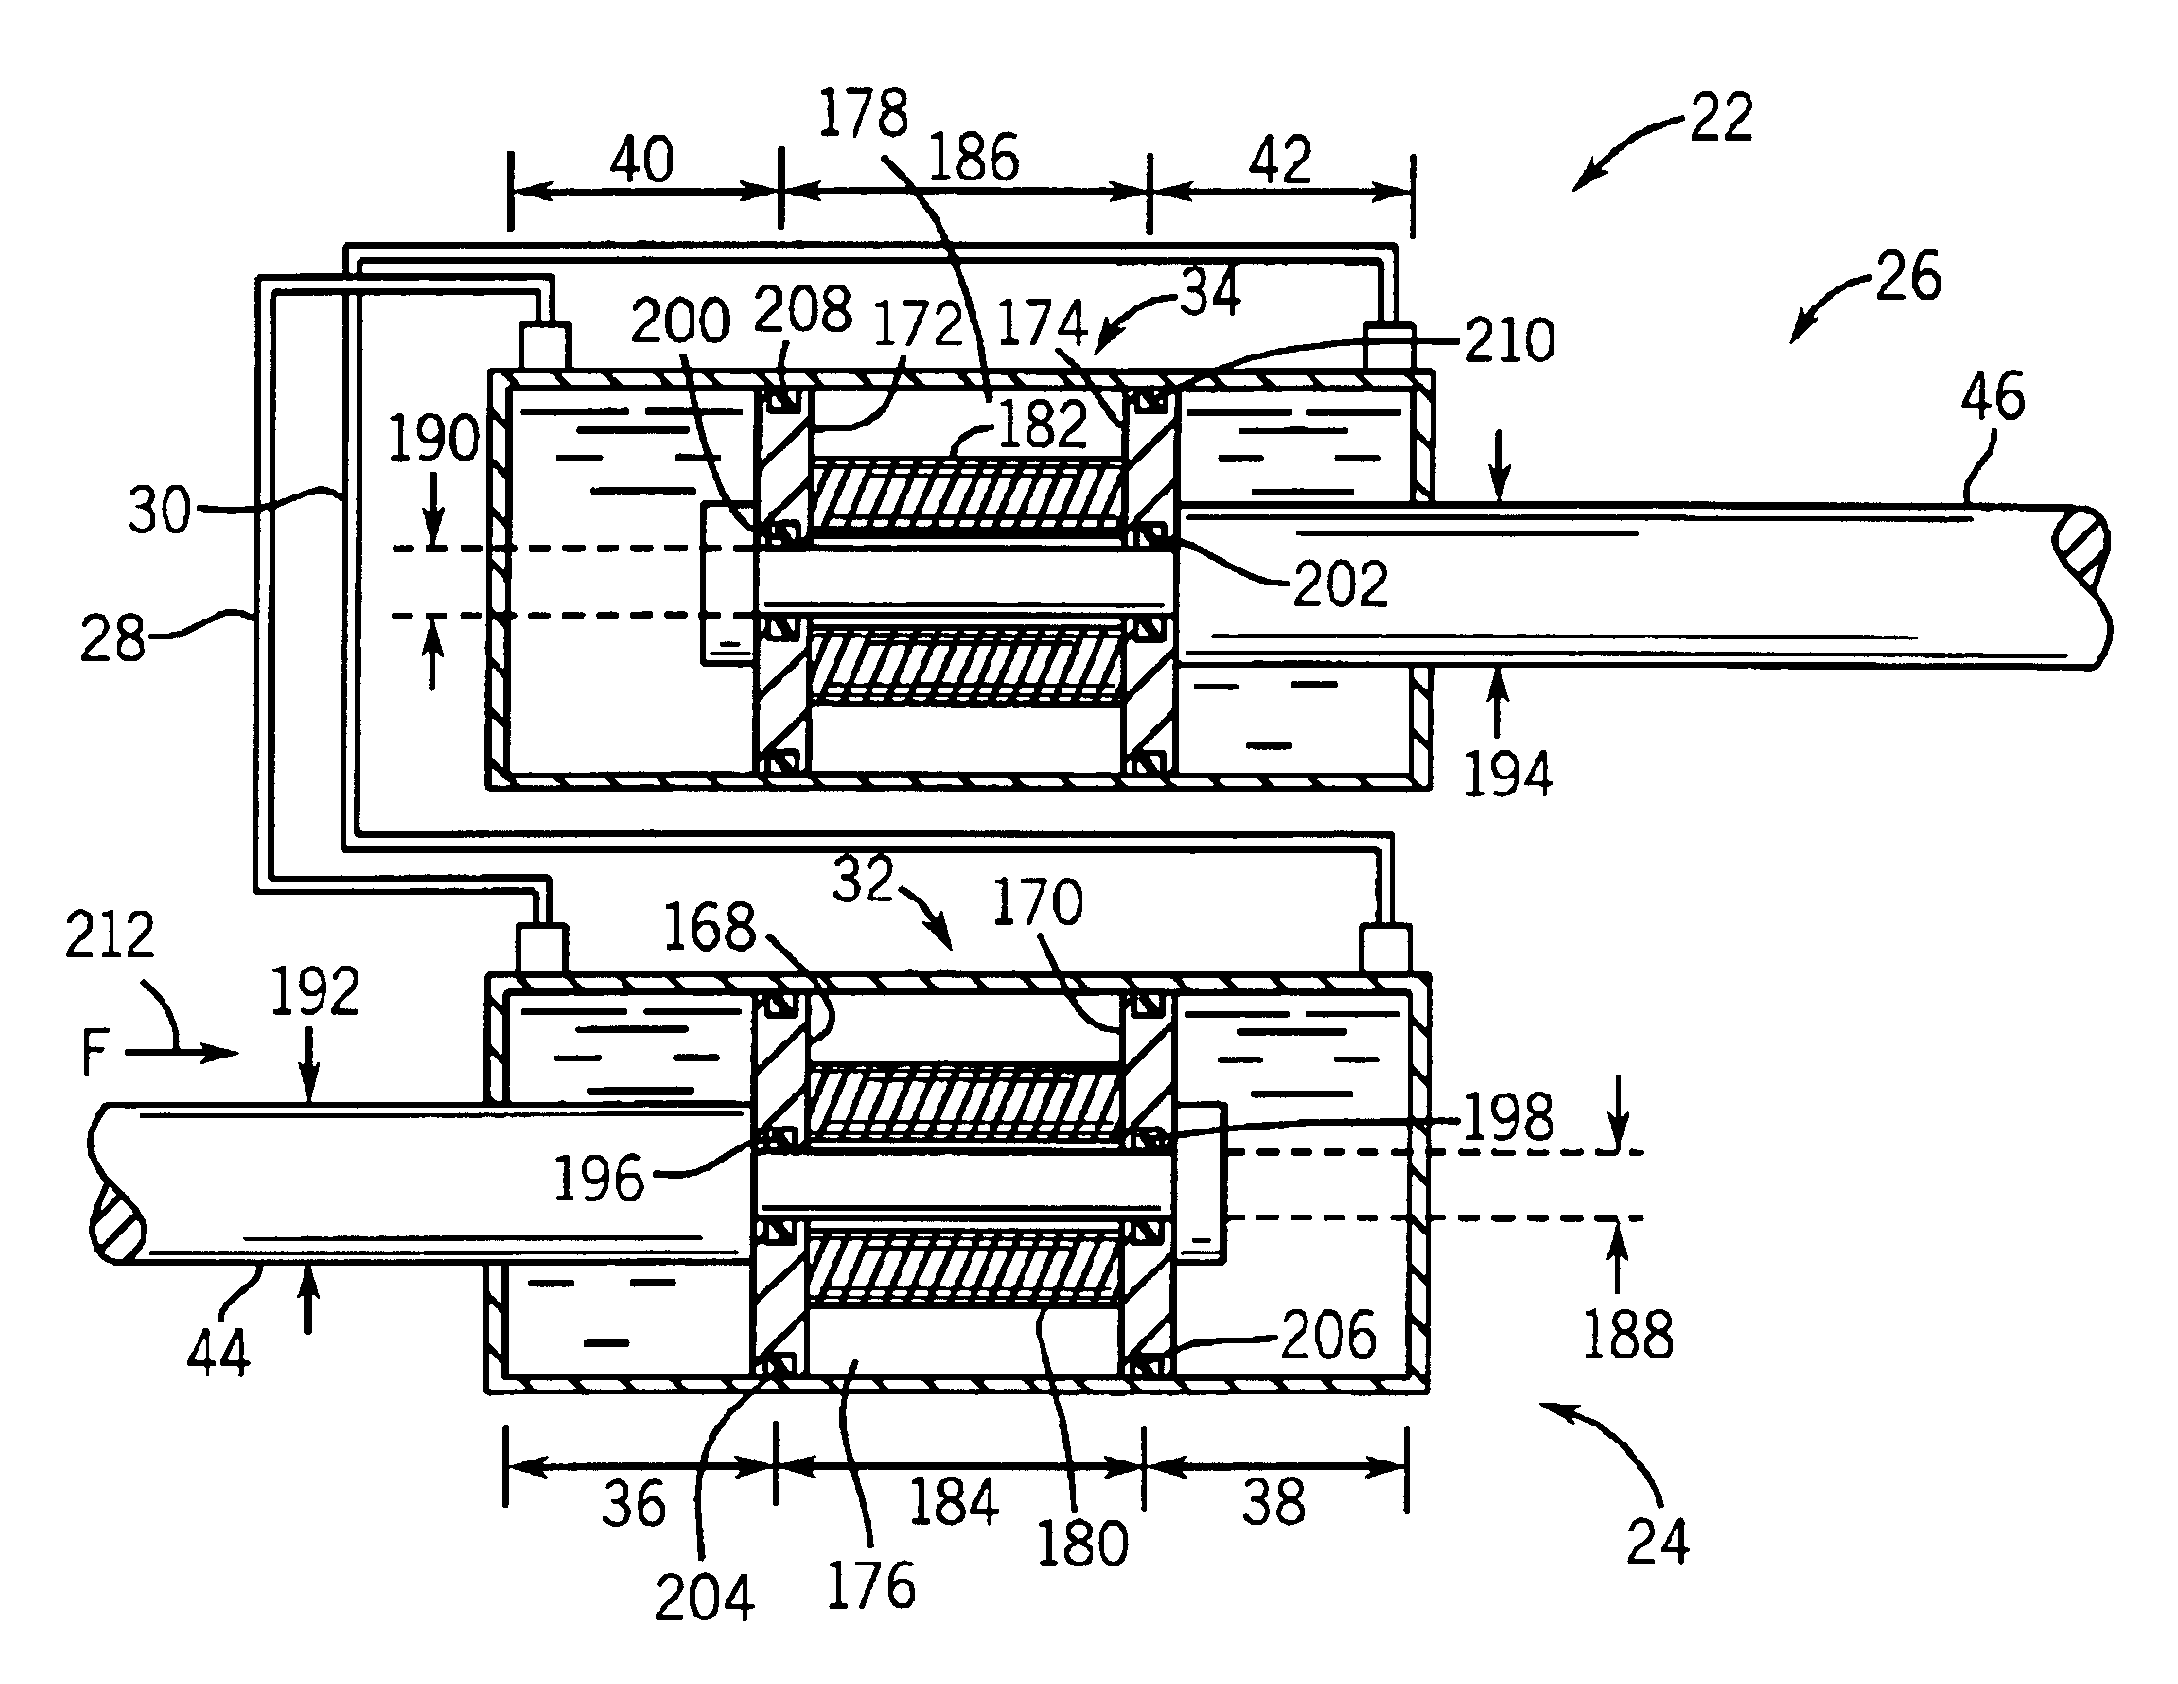 Hydraulically compensated stabilizer system